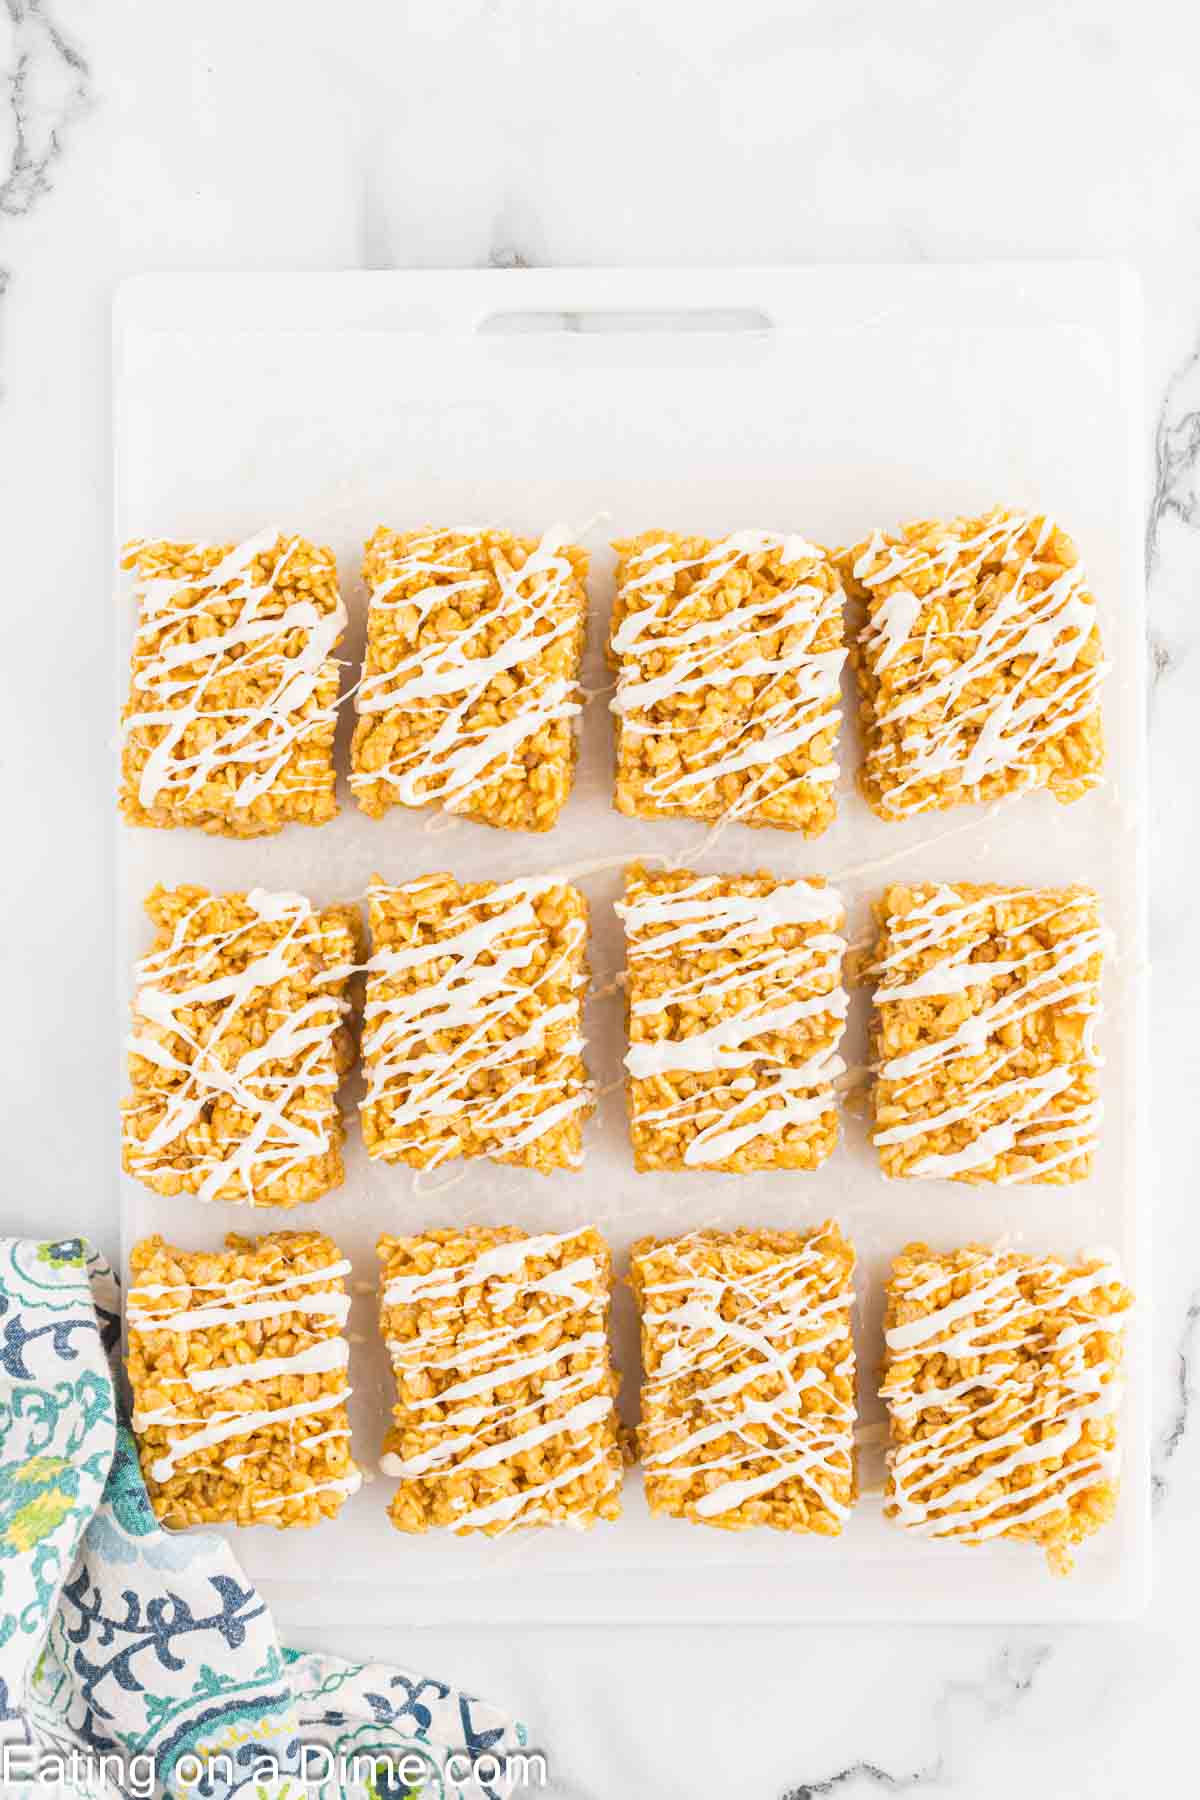 Twelve pumpkin rice krispie treats drizzled with white icing are neatly arranged in three rows on a white surface. A colorful floral-patterned cloth is partially visible in the bottom left corner.